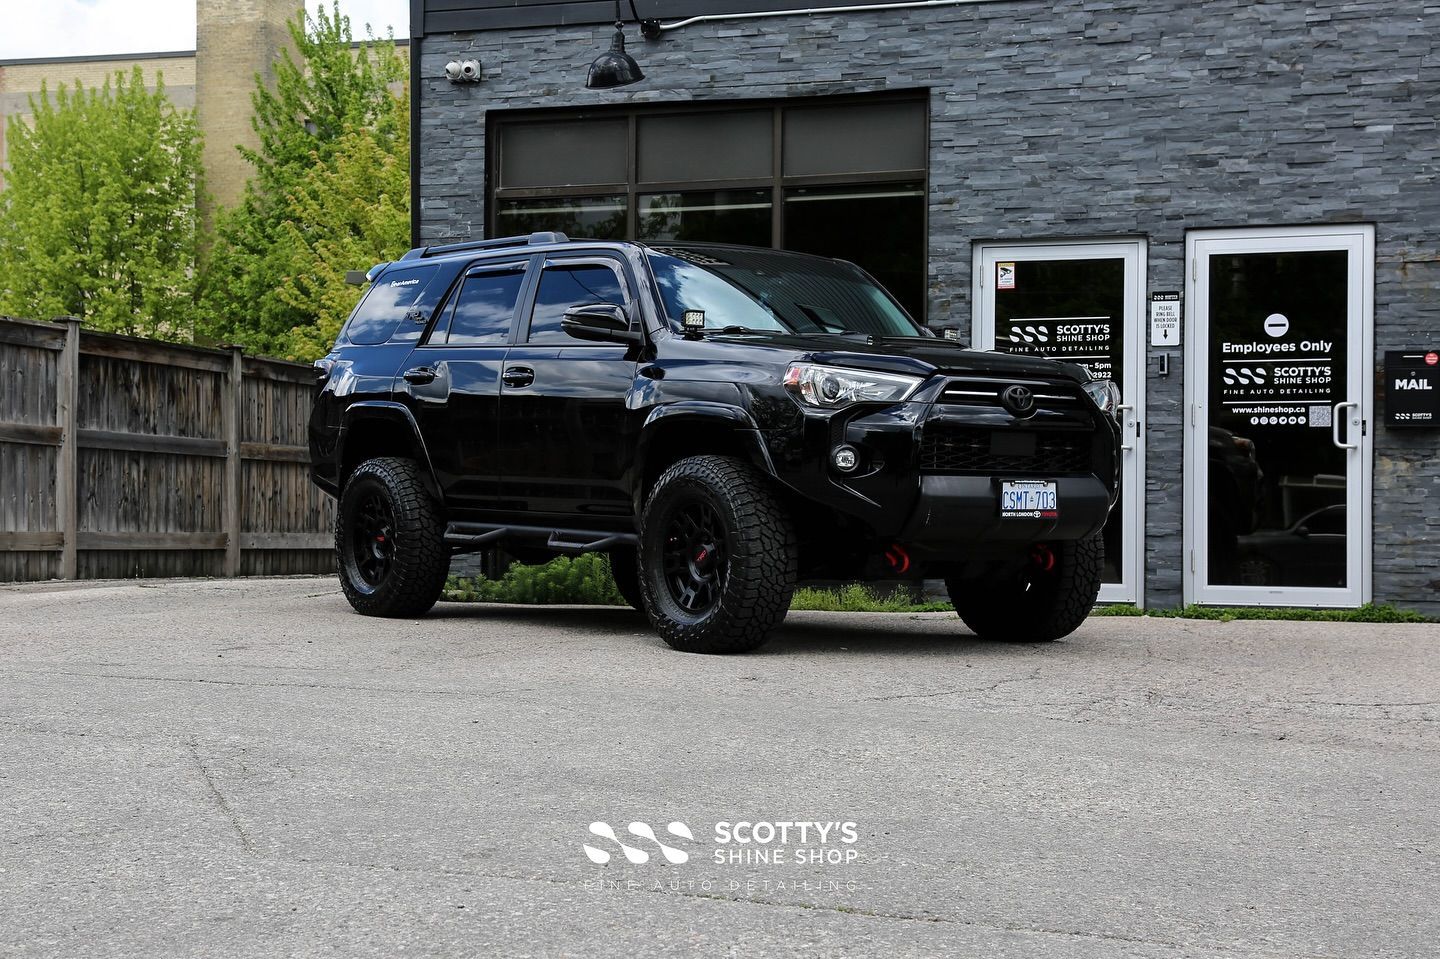 This 2021 Toyota 4Runner was at the shop for a full paint correction and ceramic coating to whip the